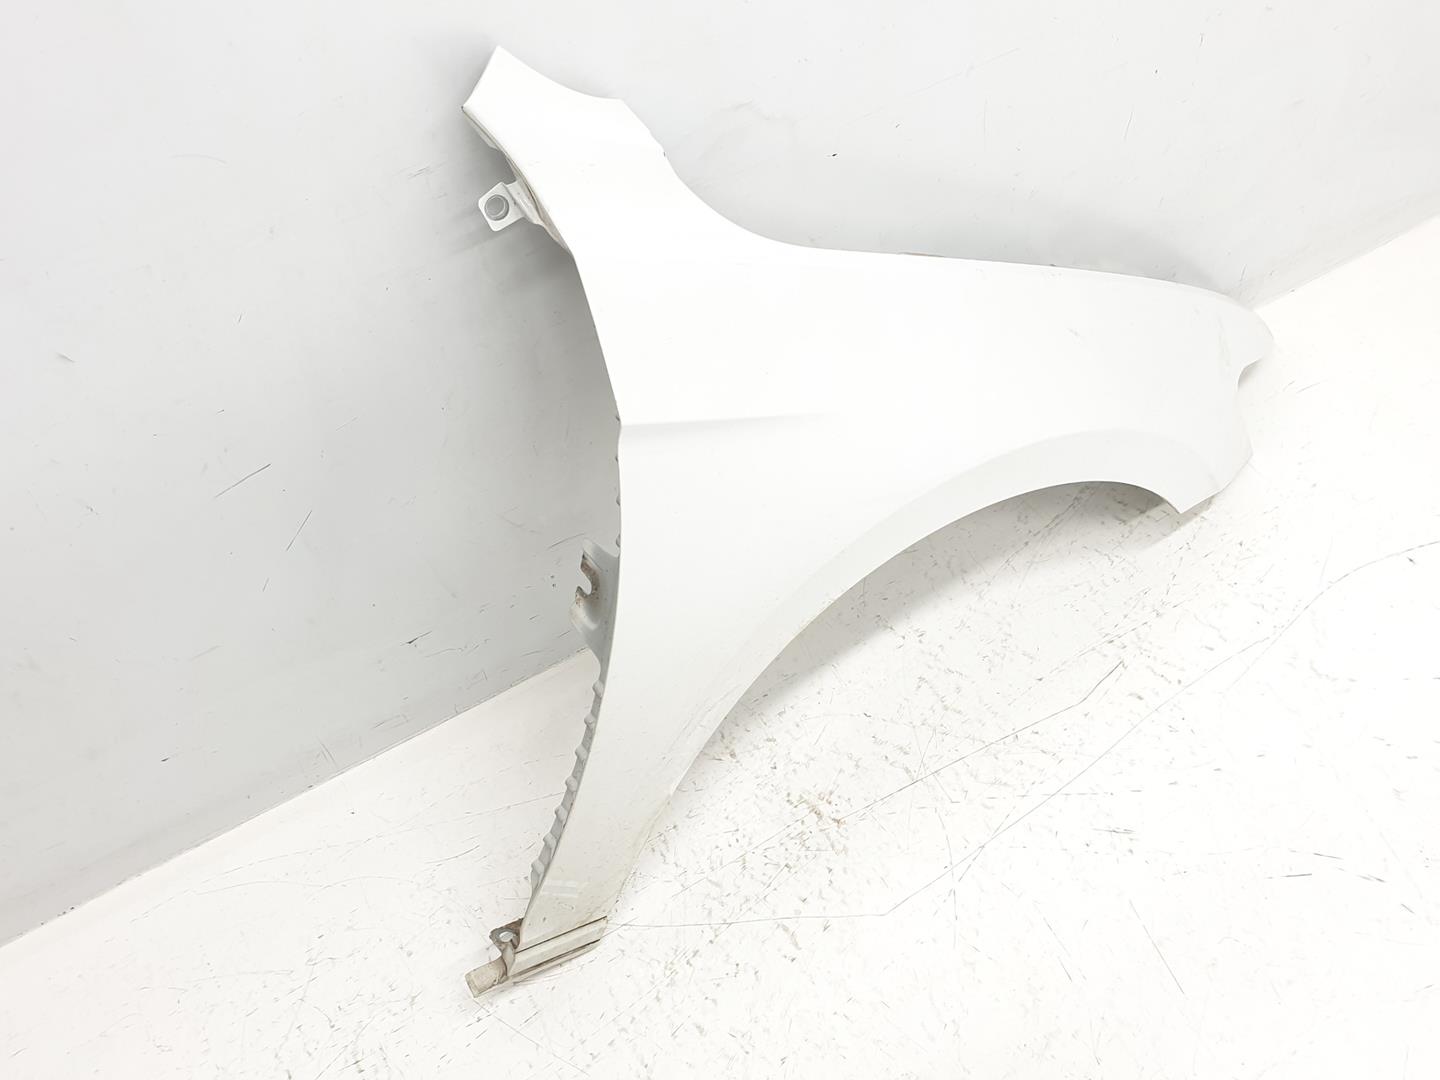 VOLKSWAGEN Passat B8 (2014-2023) Front Right Fender 3G0821022A, 3G0821022A, COLORBLANCO0Q 24884350